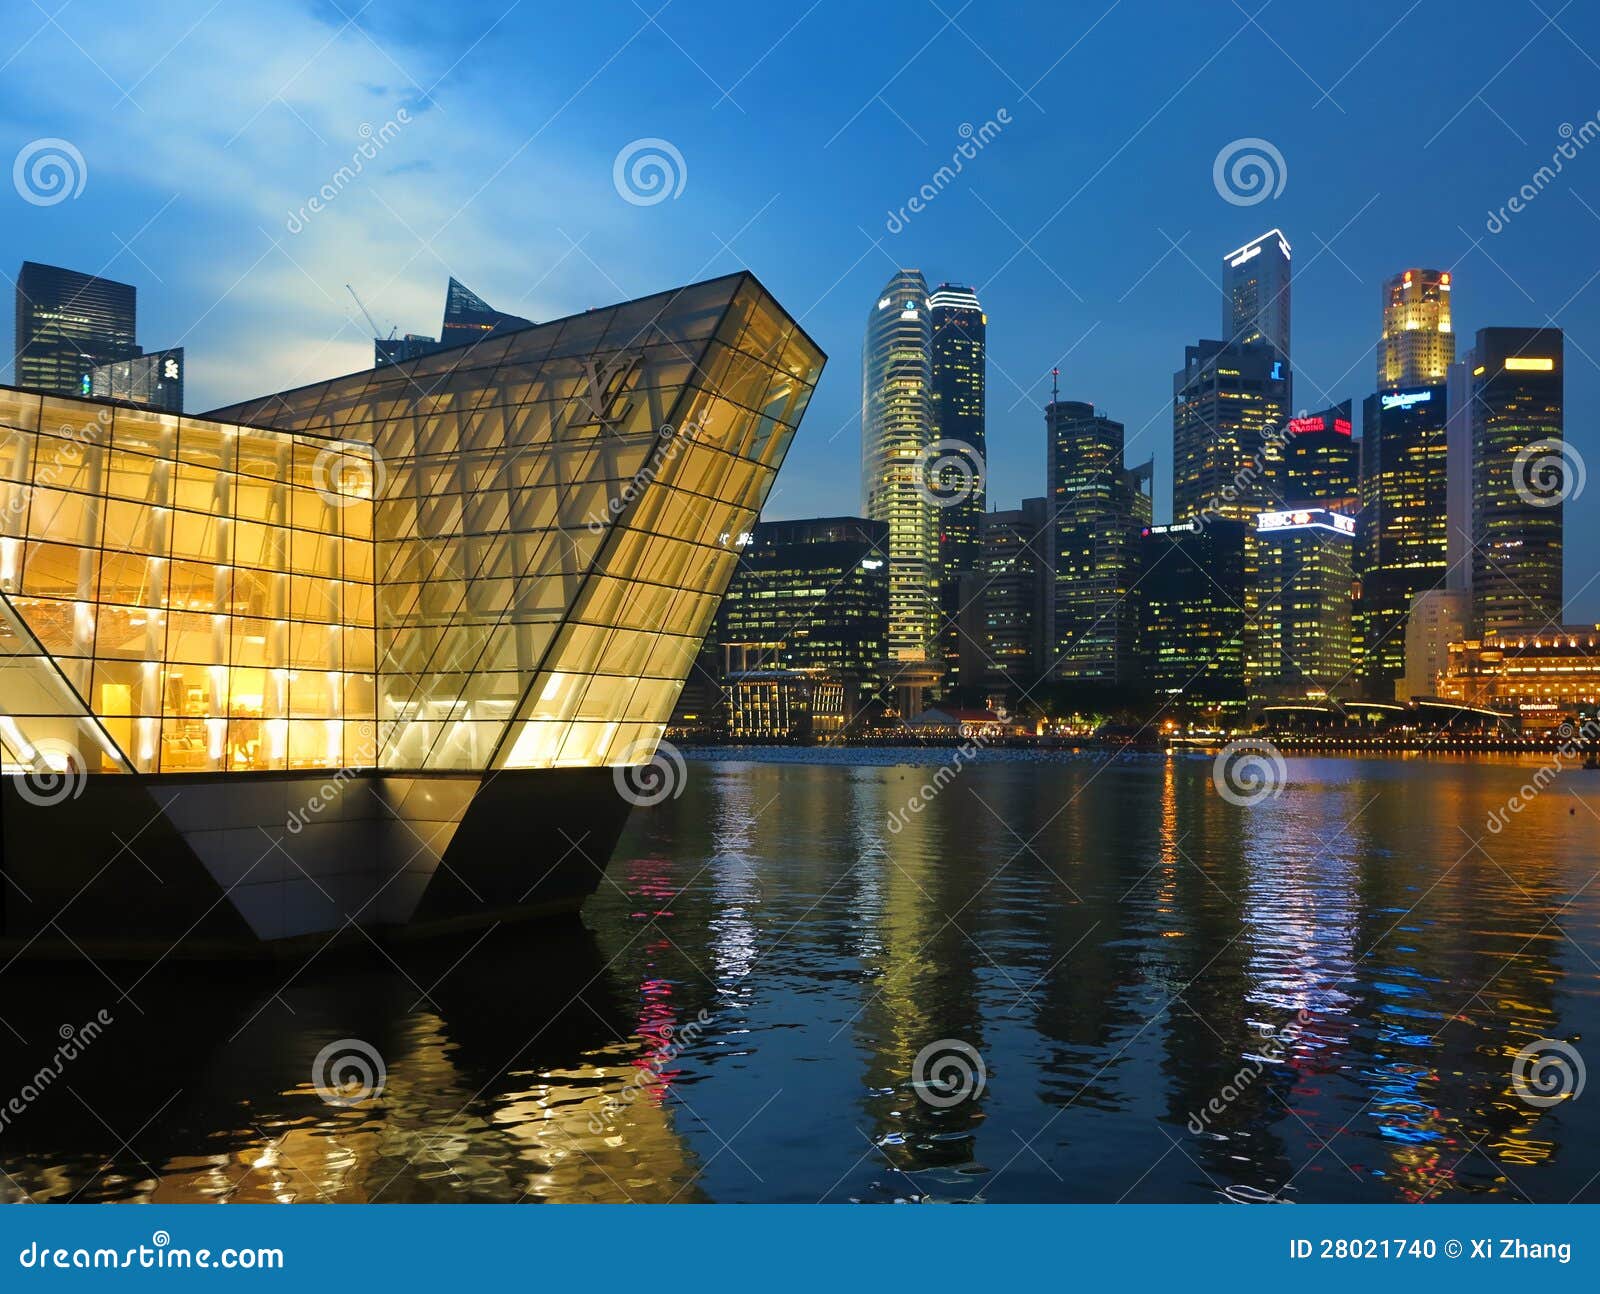 LOUIS VUITTON Flagship Store In Singapore Editorial Image - Image: 28021740